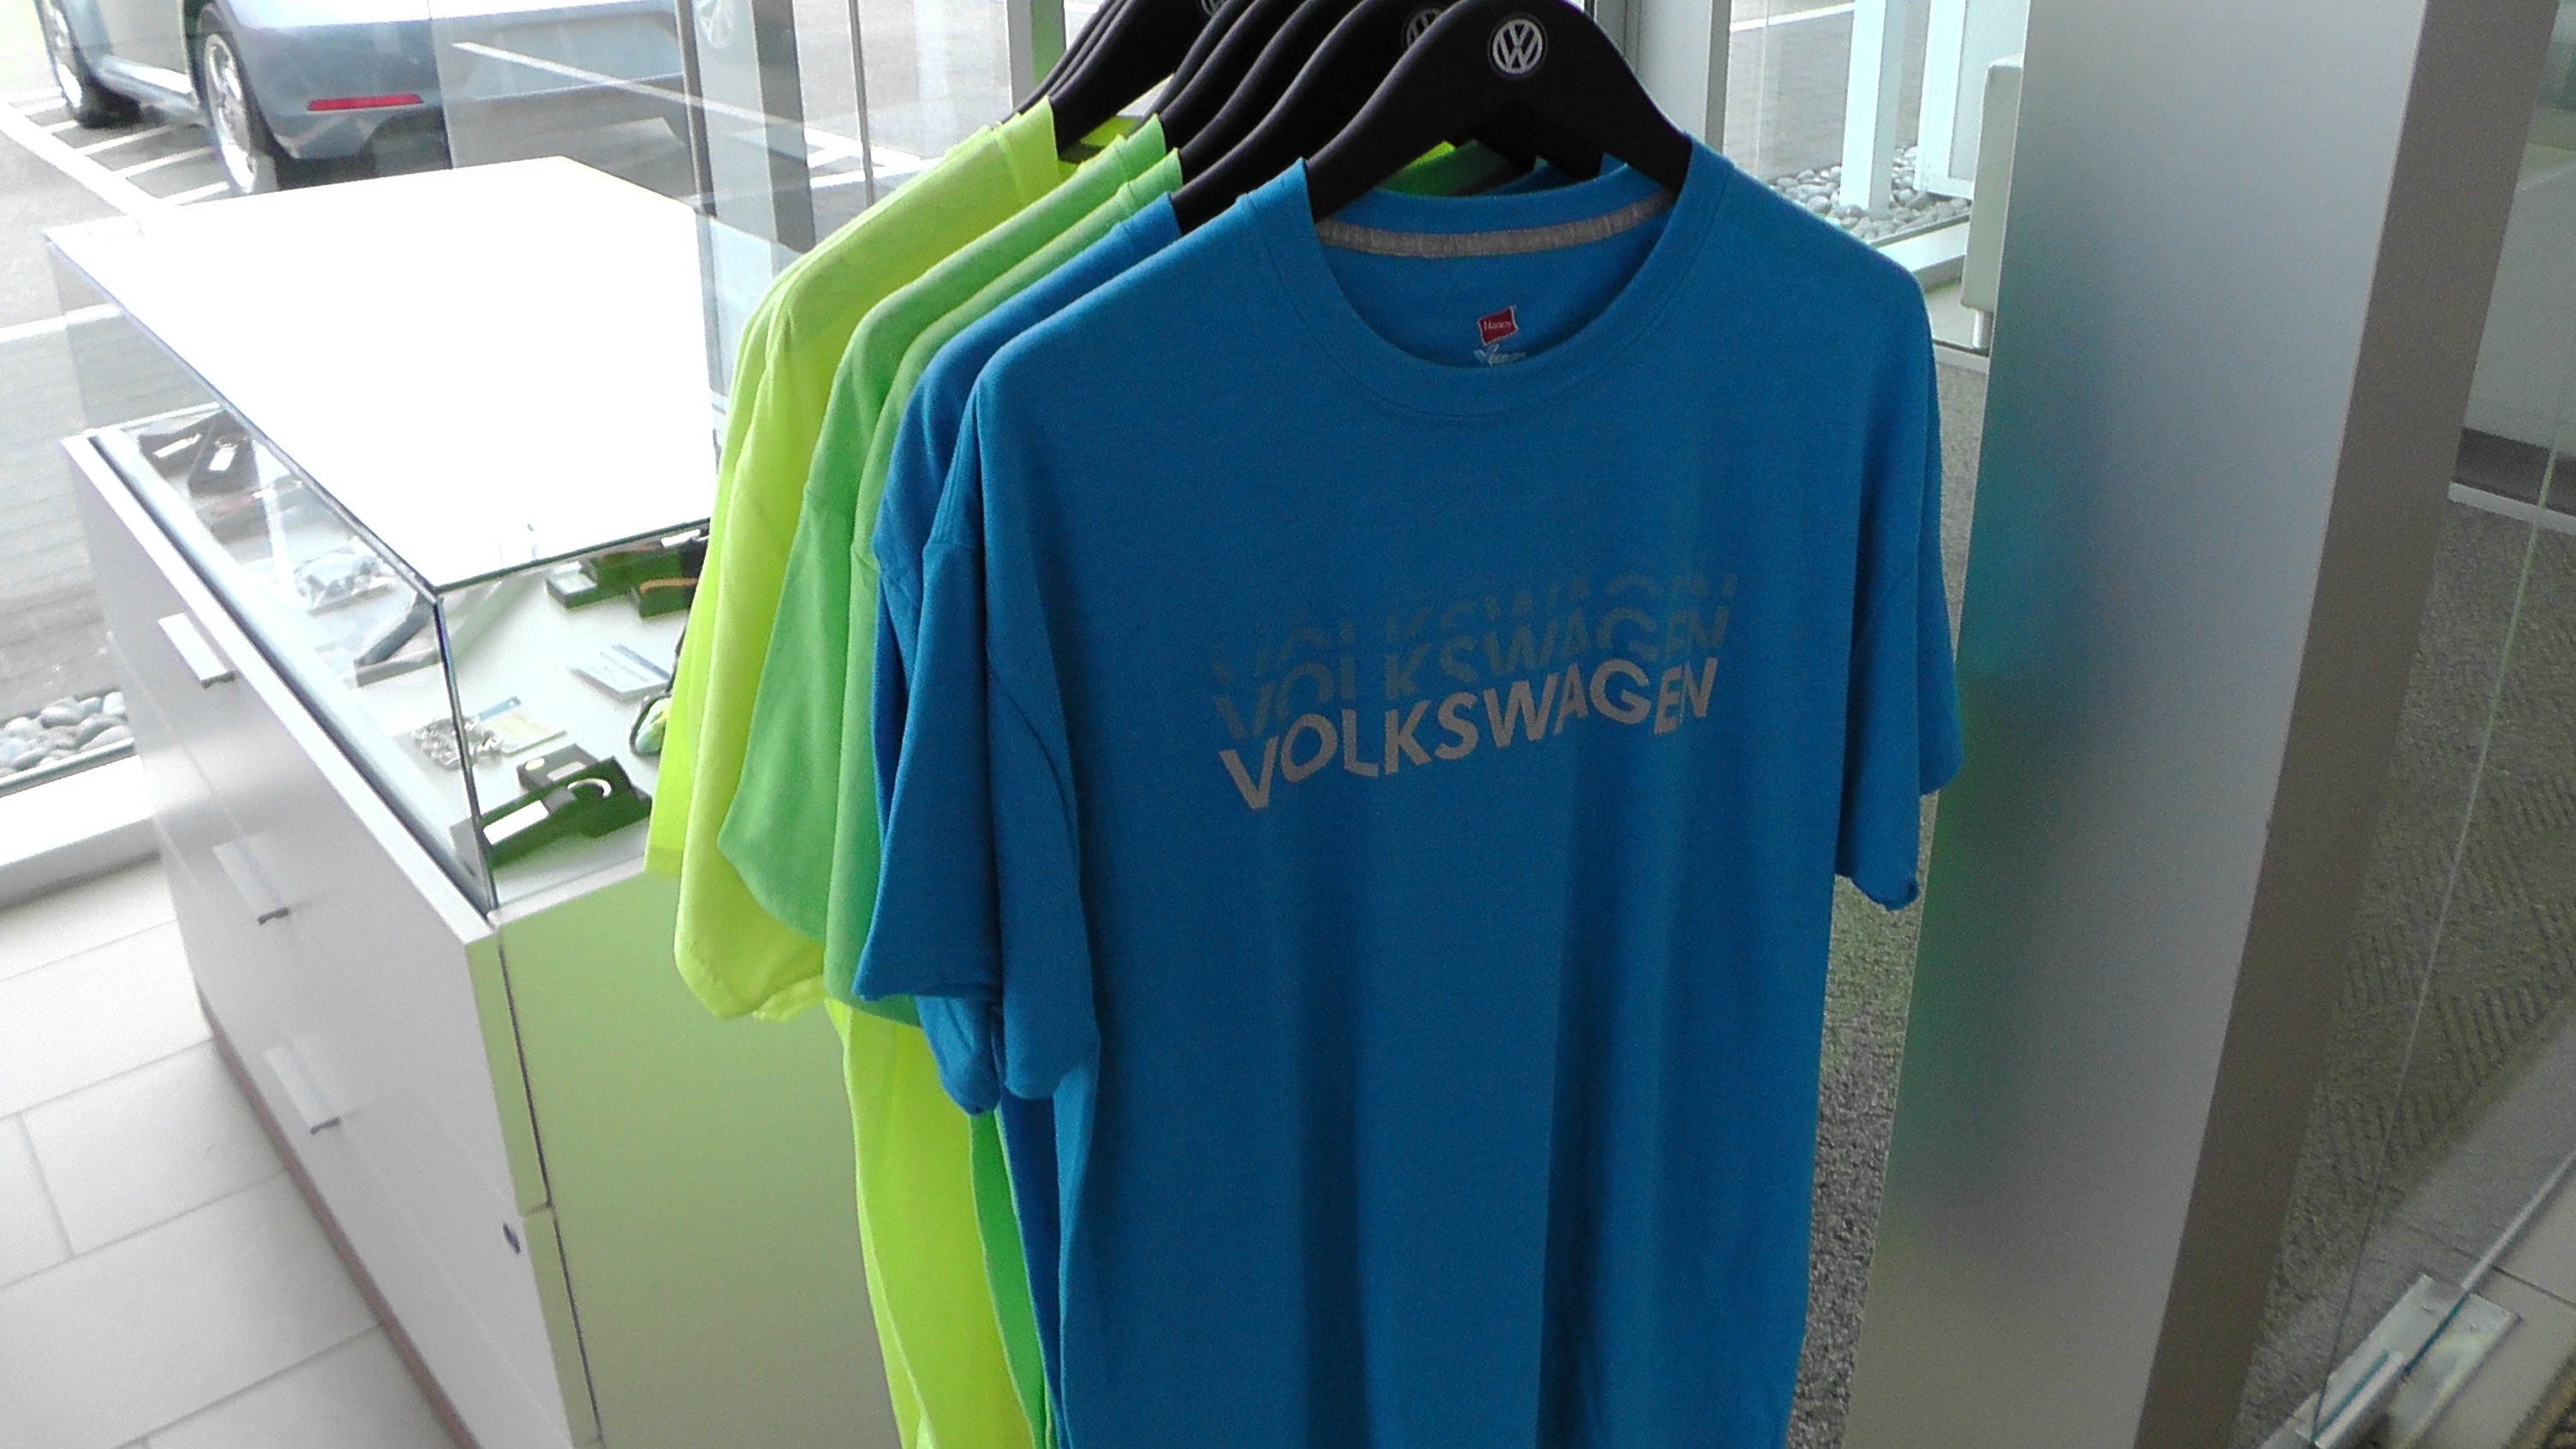 If you're a Volkswagen fan like us, you'll love the products we have on display around our Kelly Volkswagen dealership. Shirts, hats, keychains, and much more are all available for purchase and show your love for the VW brand.